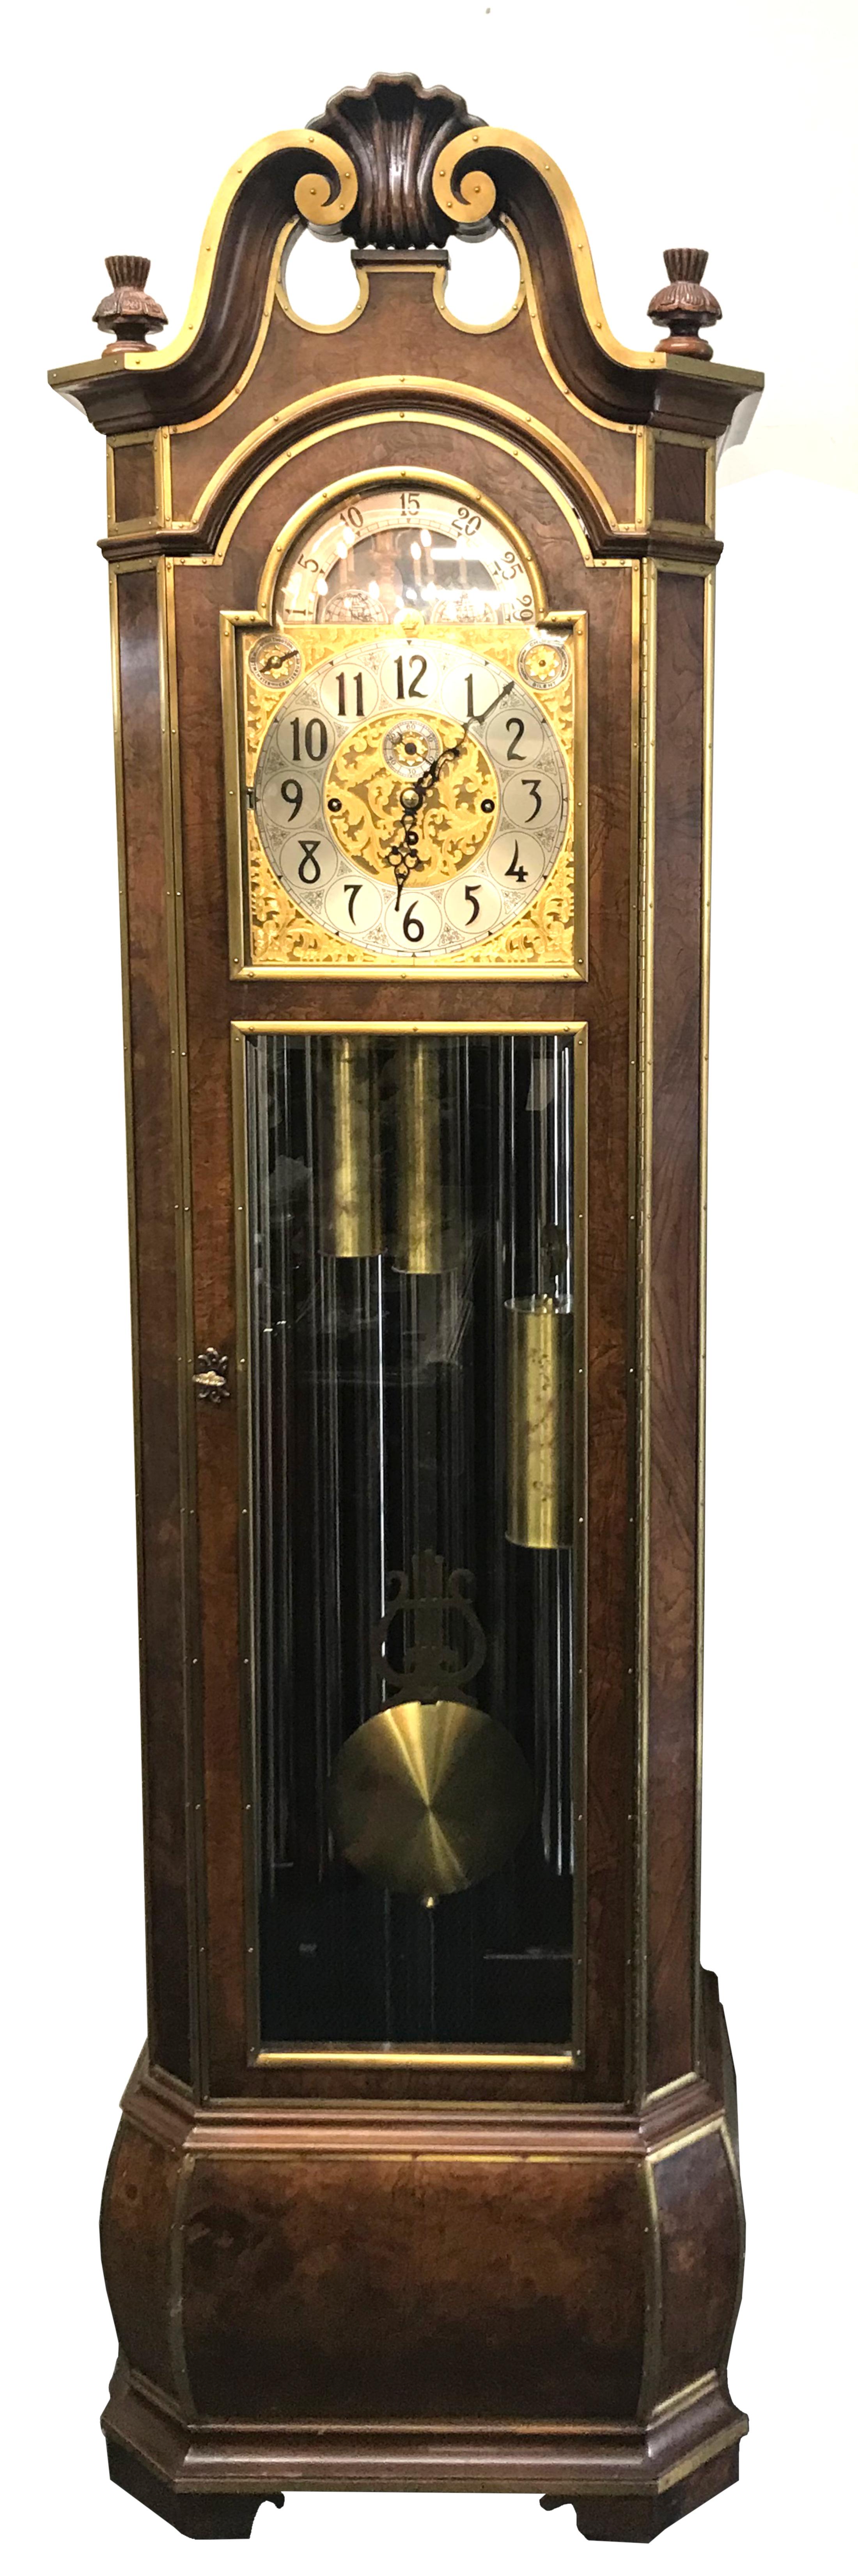 Fine Herschede brass-mounted burl wood tall case clock, 
Model 250, The movement and face signed Herschede. 
The flagship tall case clock of the Herschede Hall Clock Company, it was also one of the last to be produced by Herschede prior to the